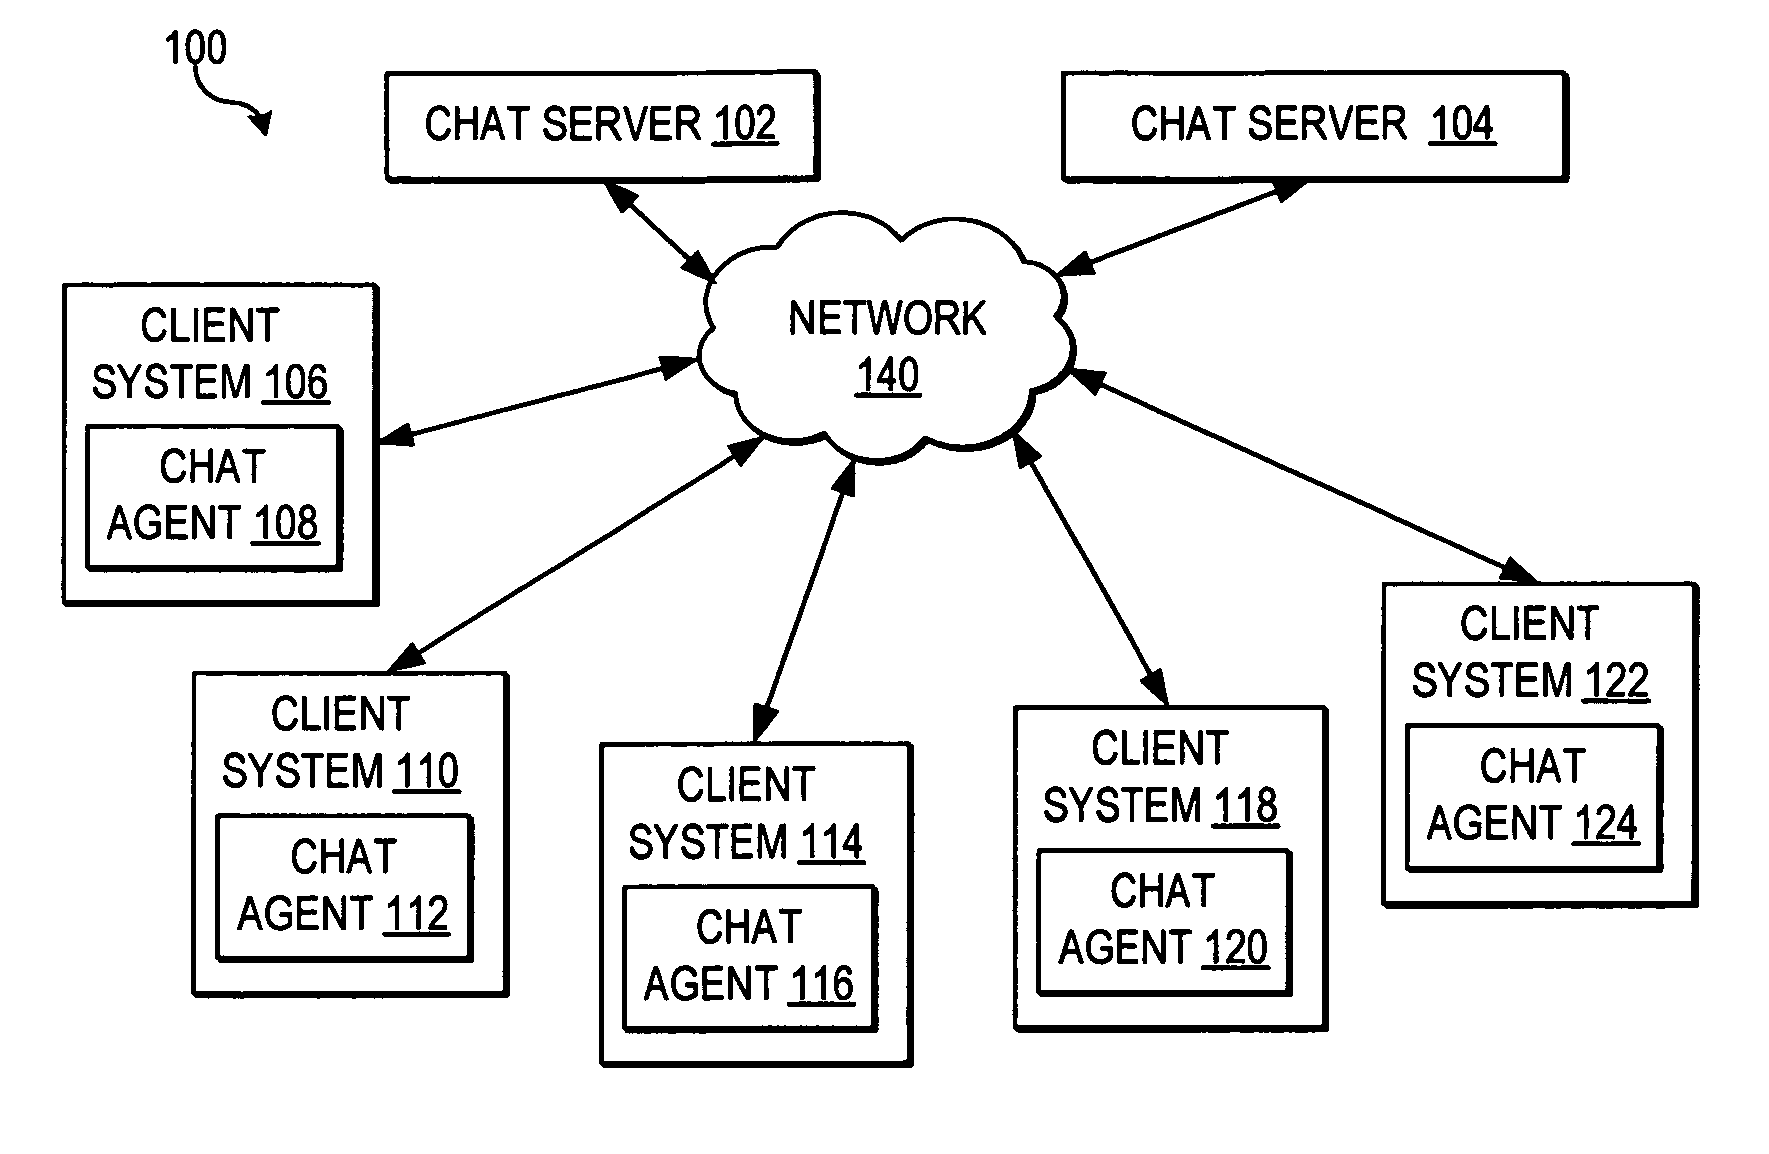 Automatically setting an avoidance threshold and adjusting a chat presence based on user avoidance of chat sessions